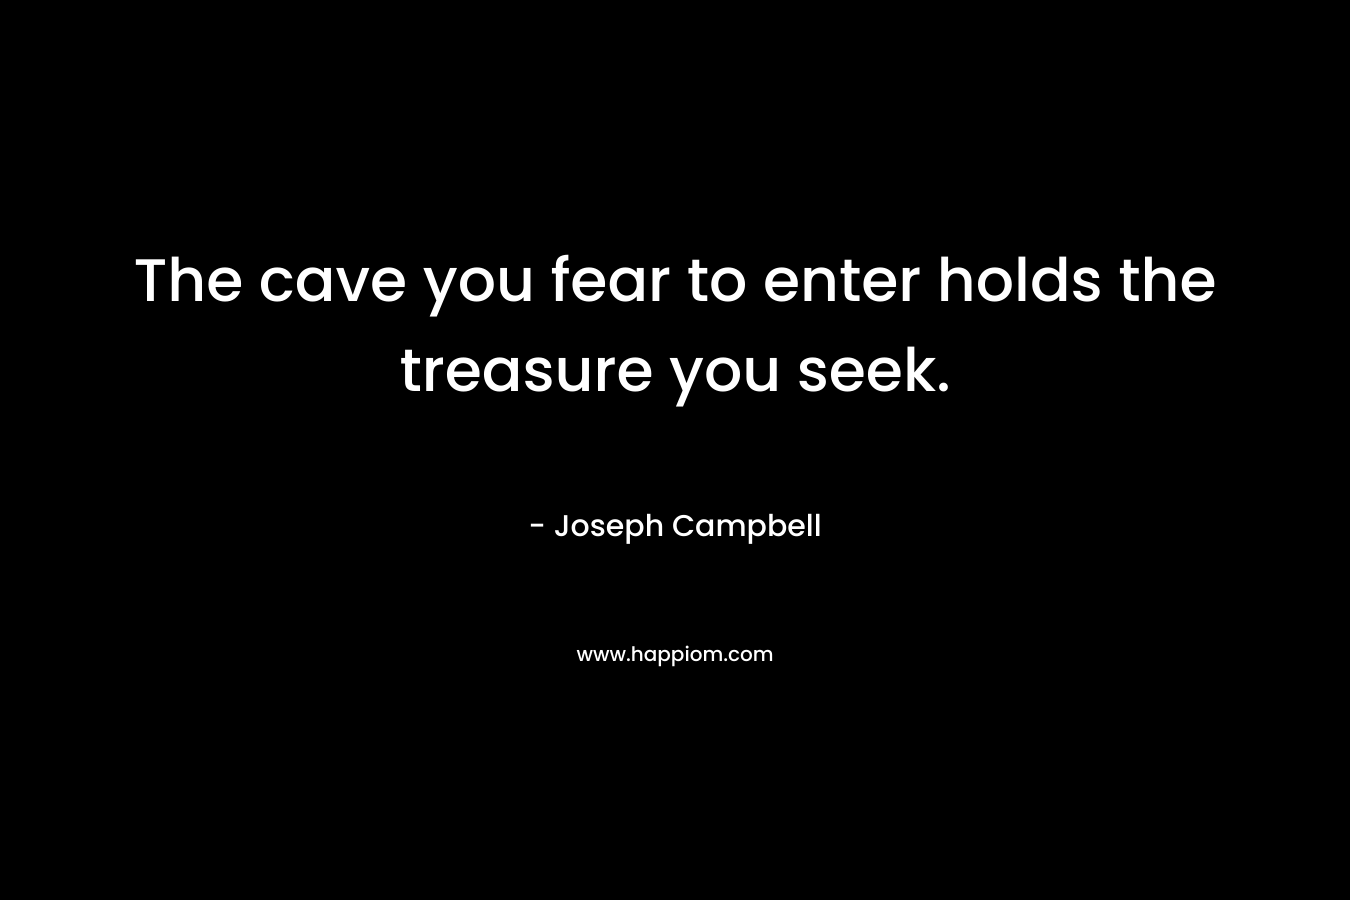 The cave you fear to enter holds the treasure you seek.